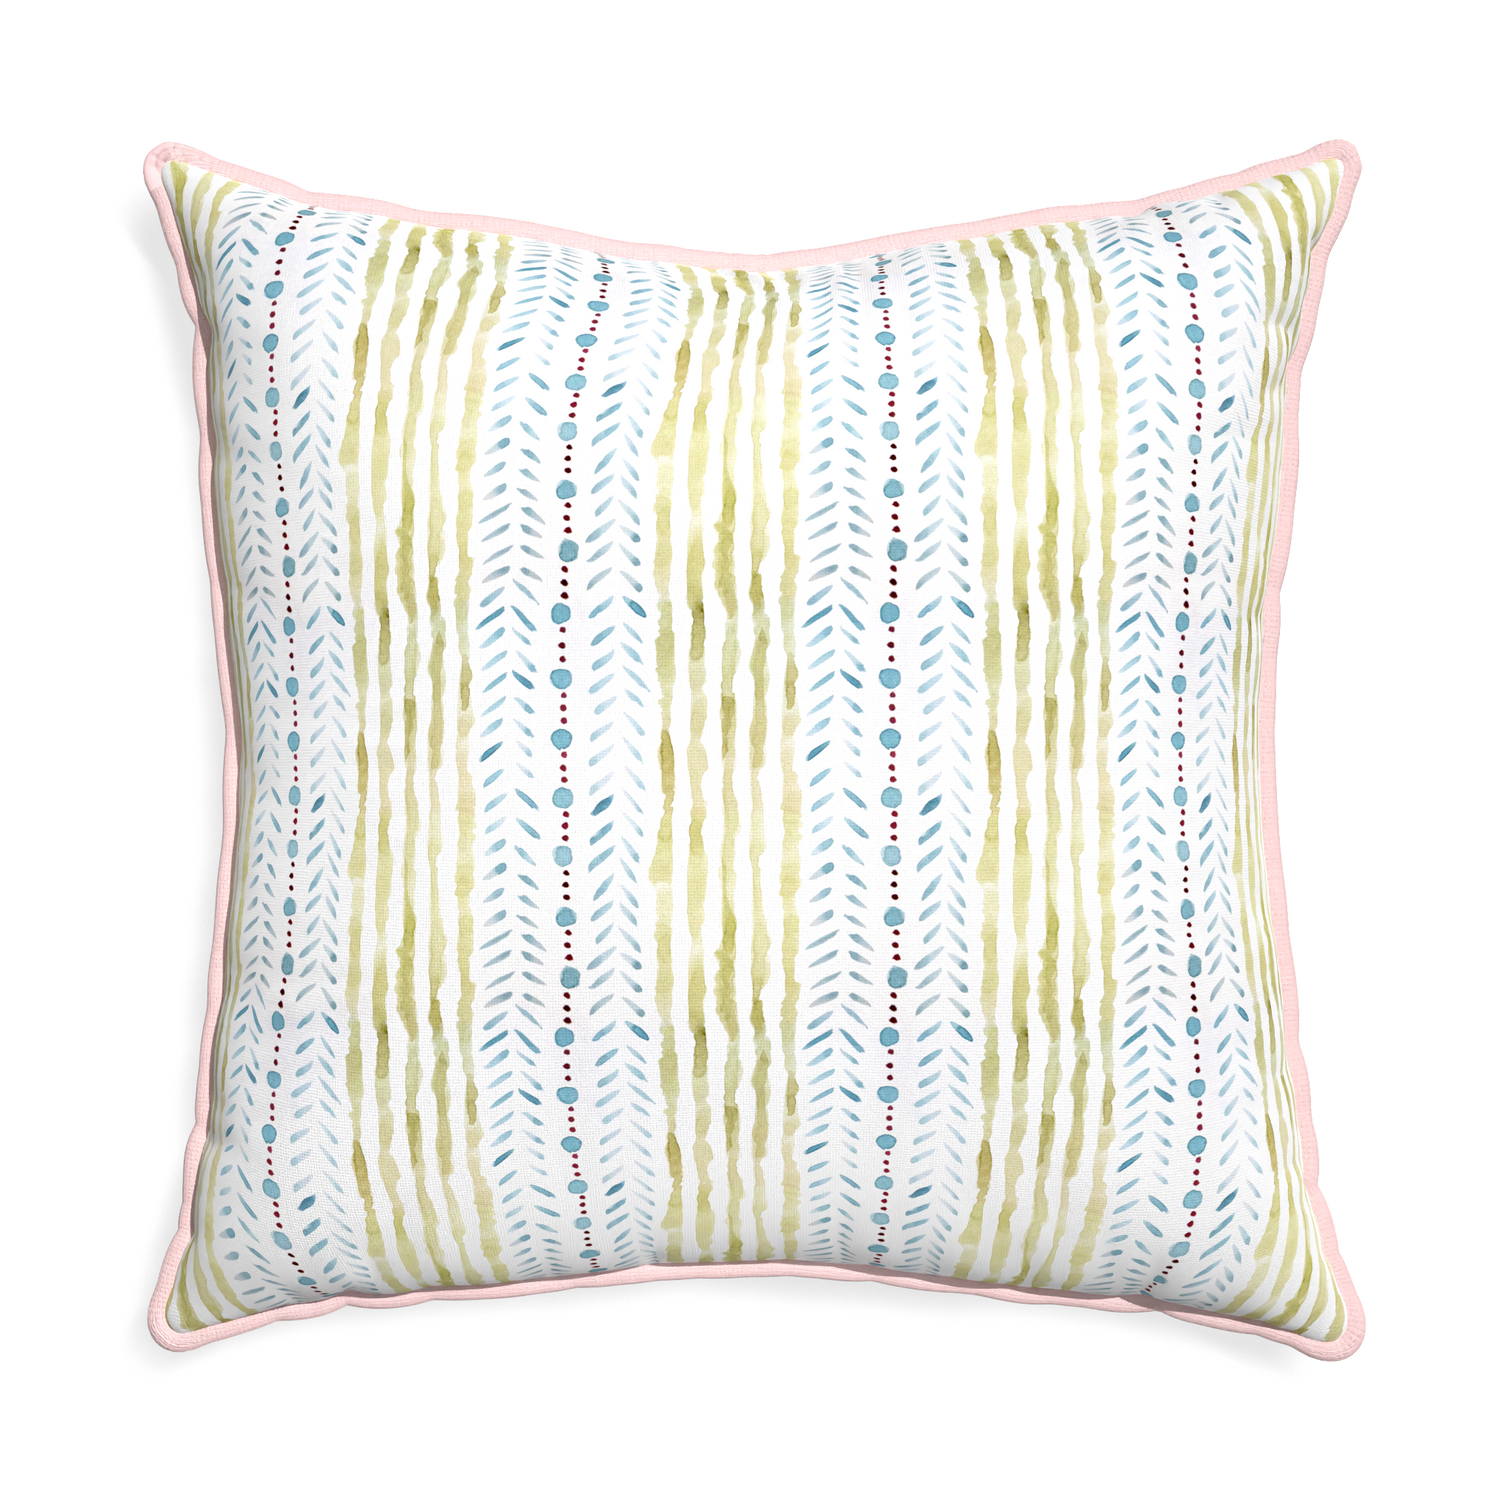 Euro-sham julia custom pillow with petal piping on white background